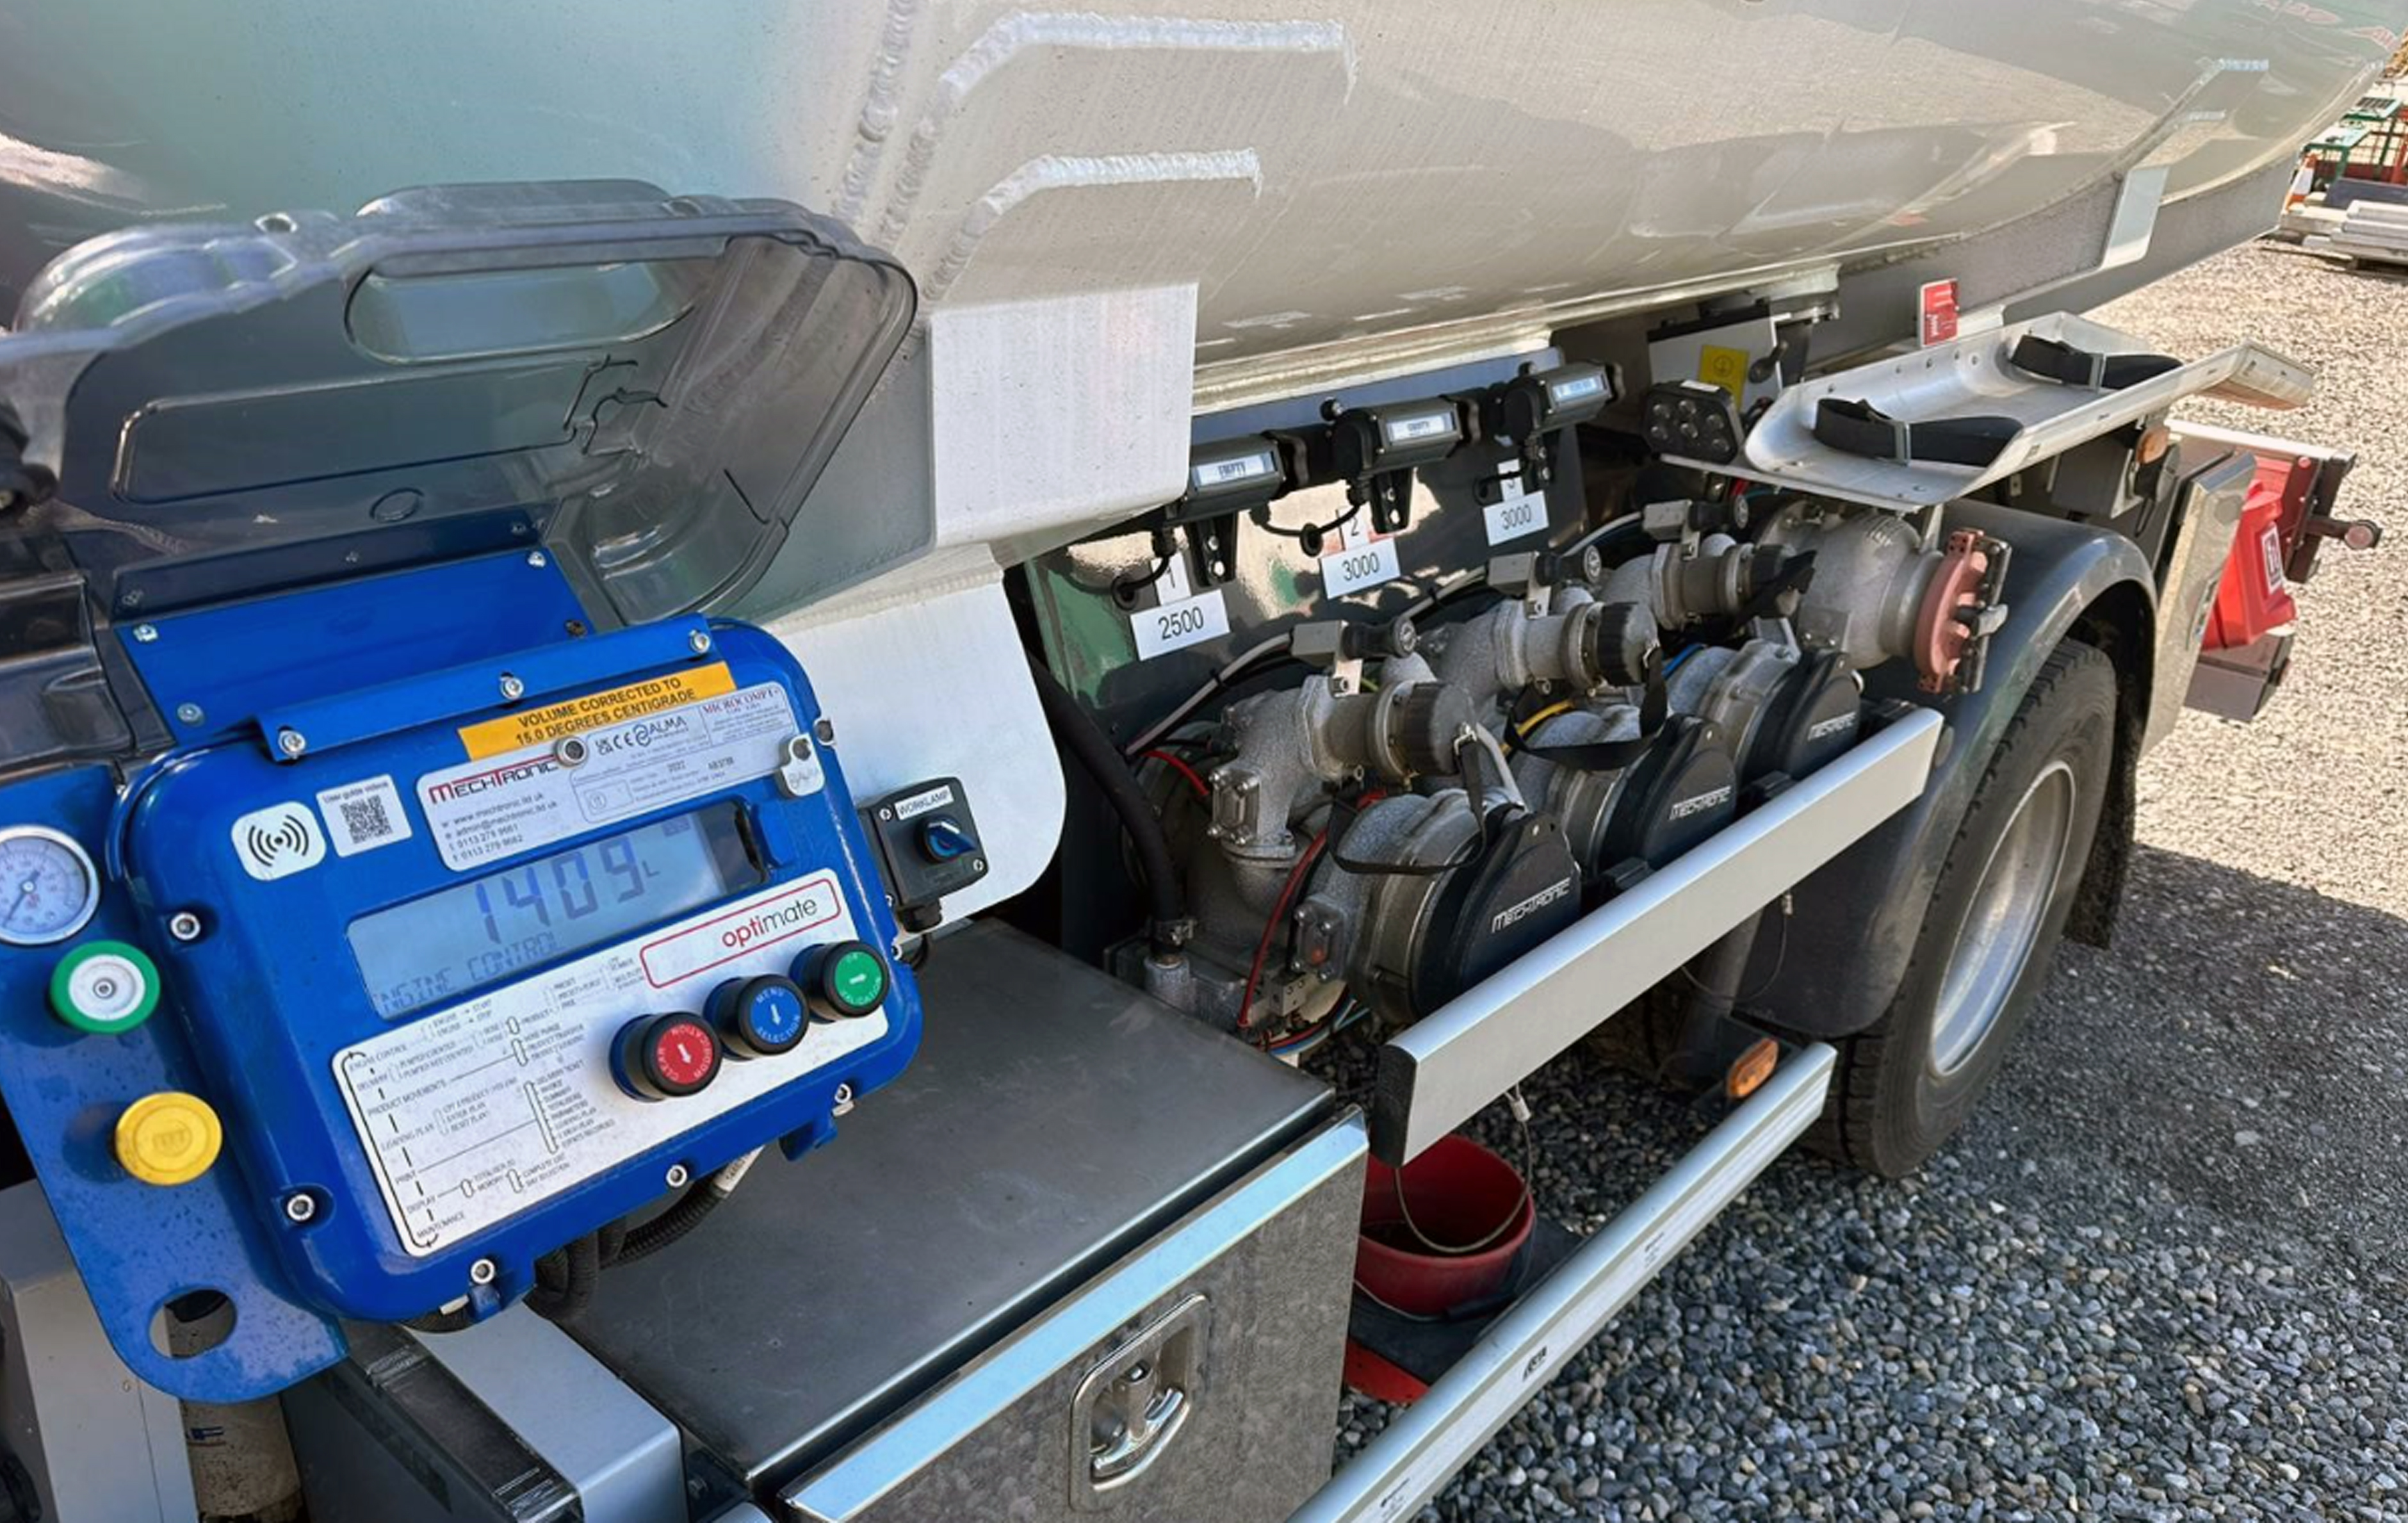 : MechTronic’s truck-mounted fuel delivery systems comprise a variety of electronic components.